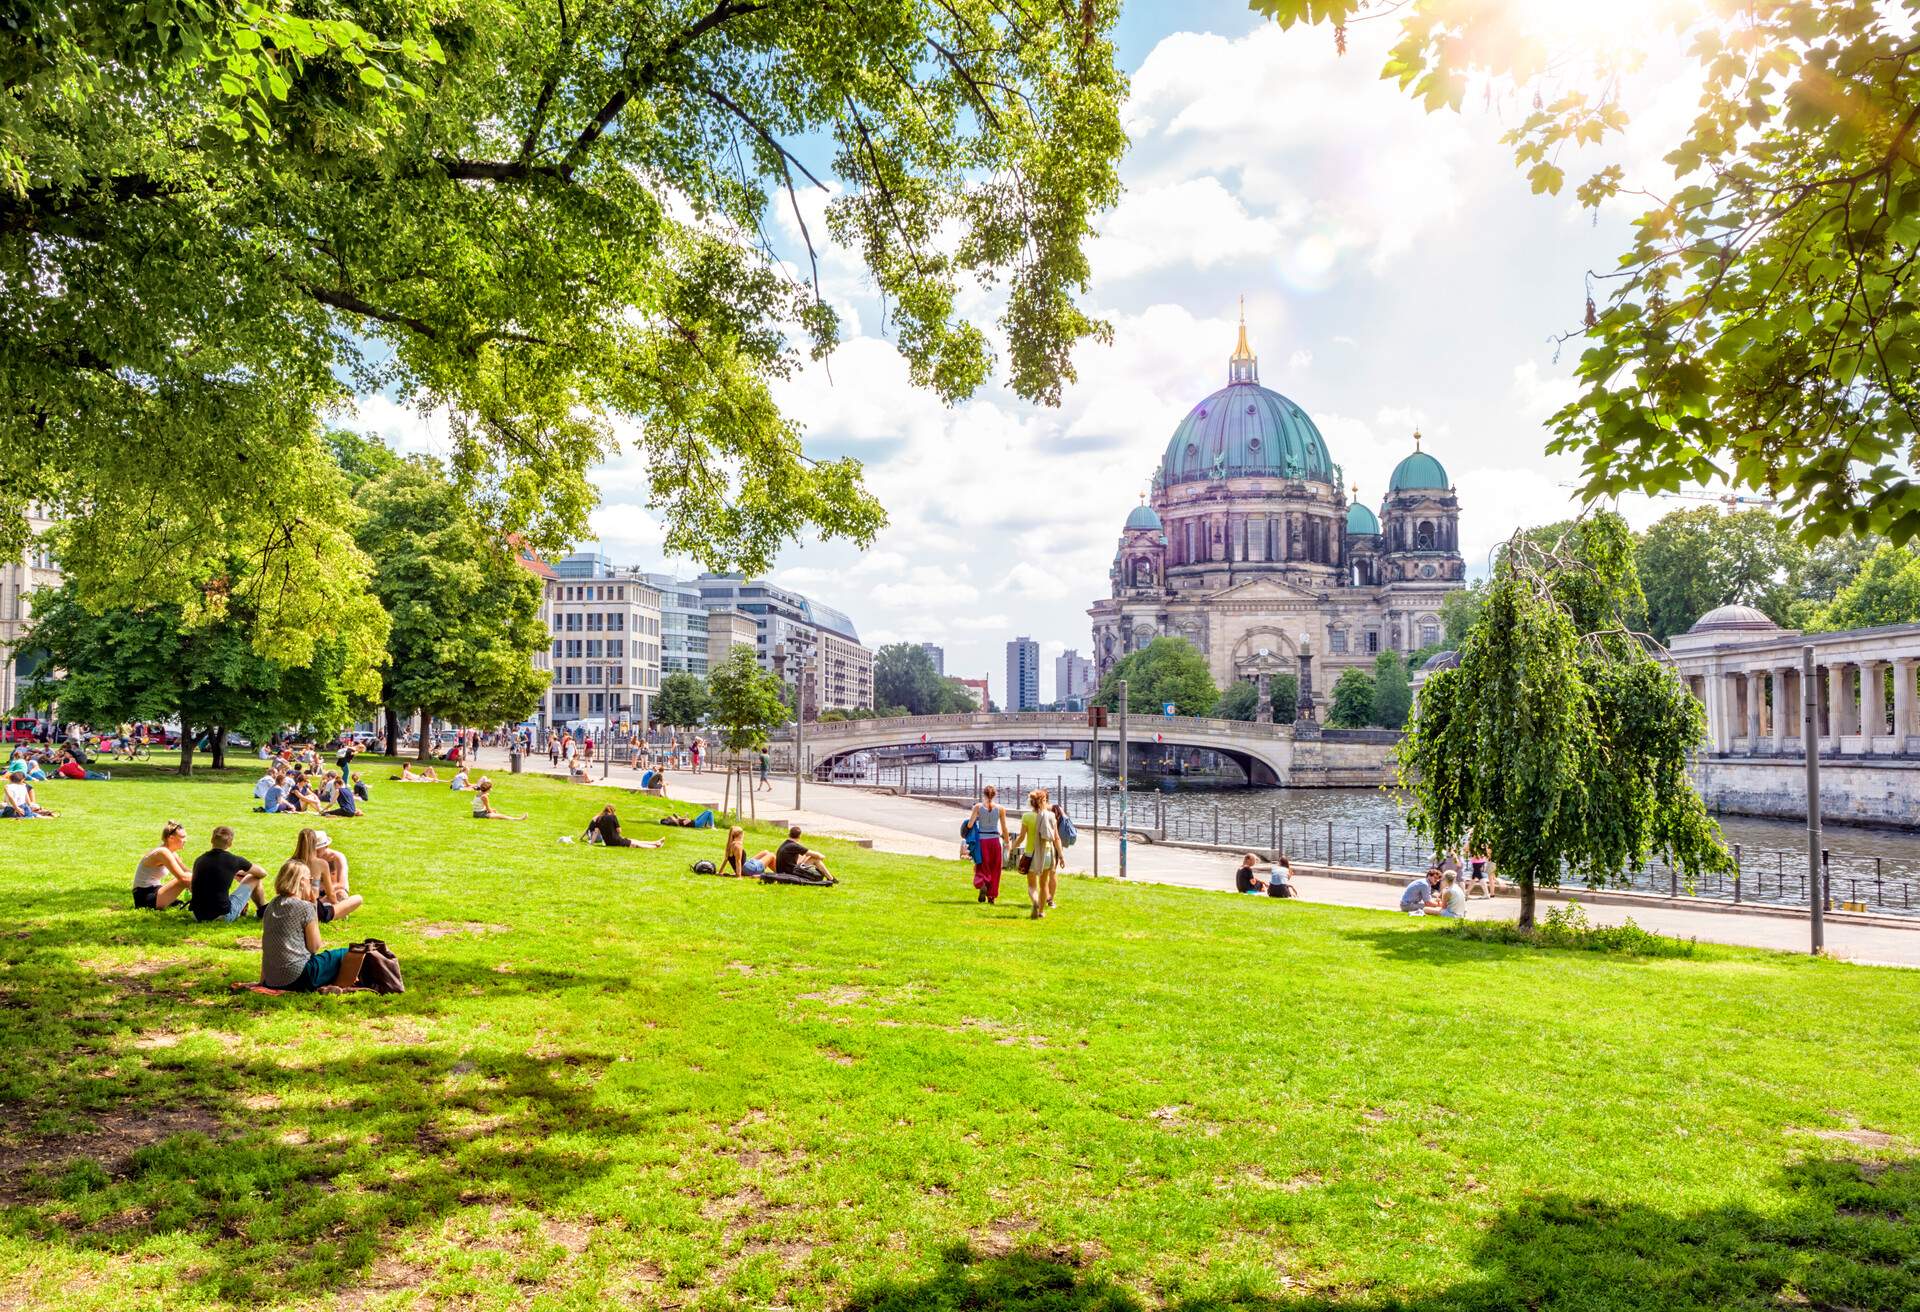 People enjoying a sunny day at a park by the river overlooking the Berlin Cathedral.